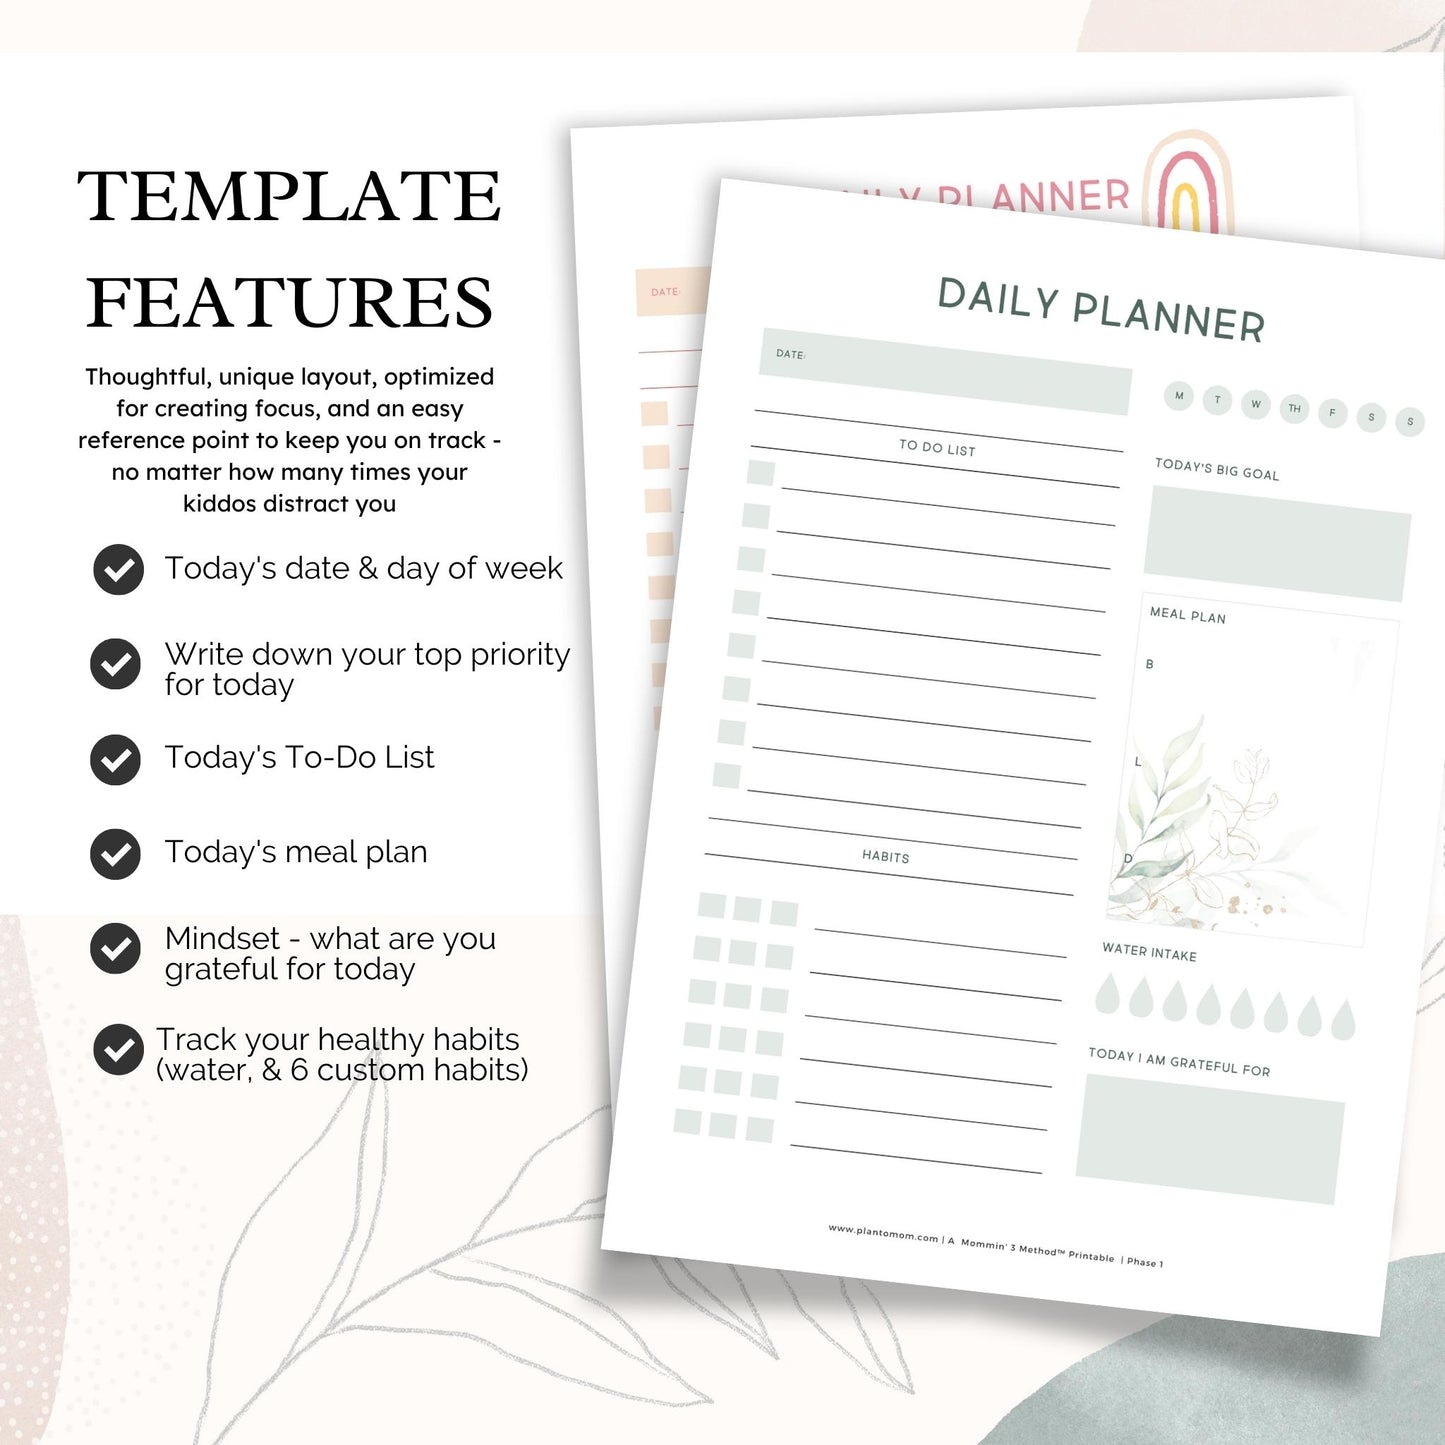 Printable Daily Planner Bundle of 5 - US LETTER COLOR - 'Daily Planner with meal planner + habits' Layout